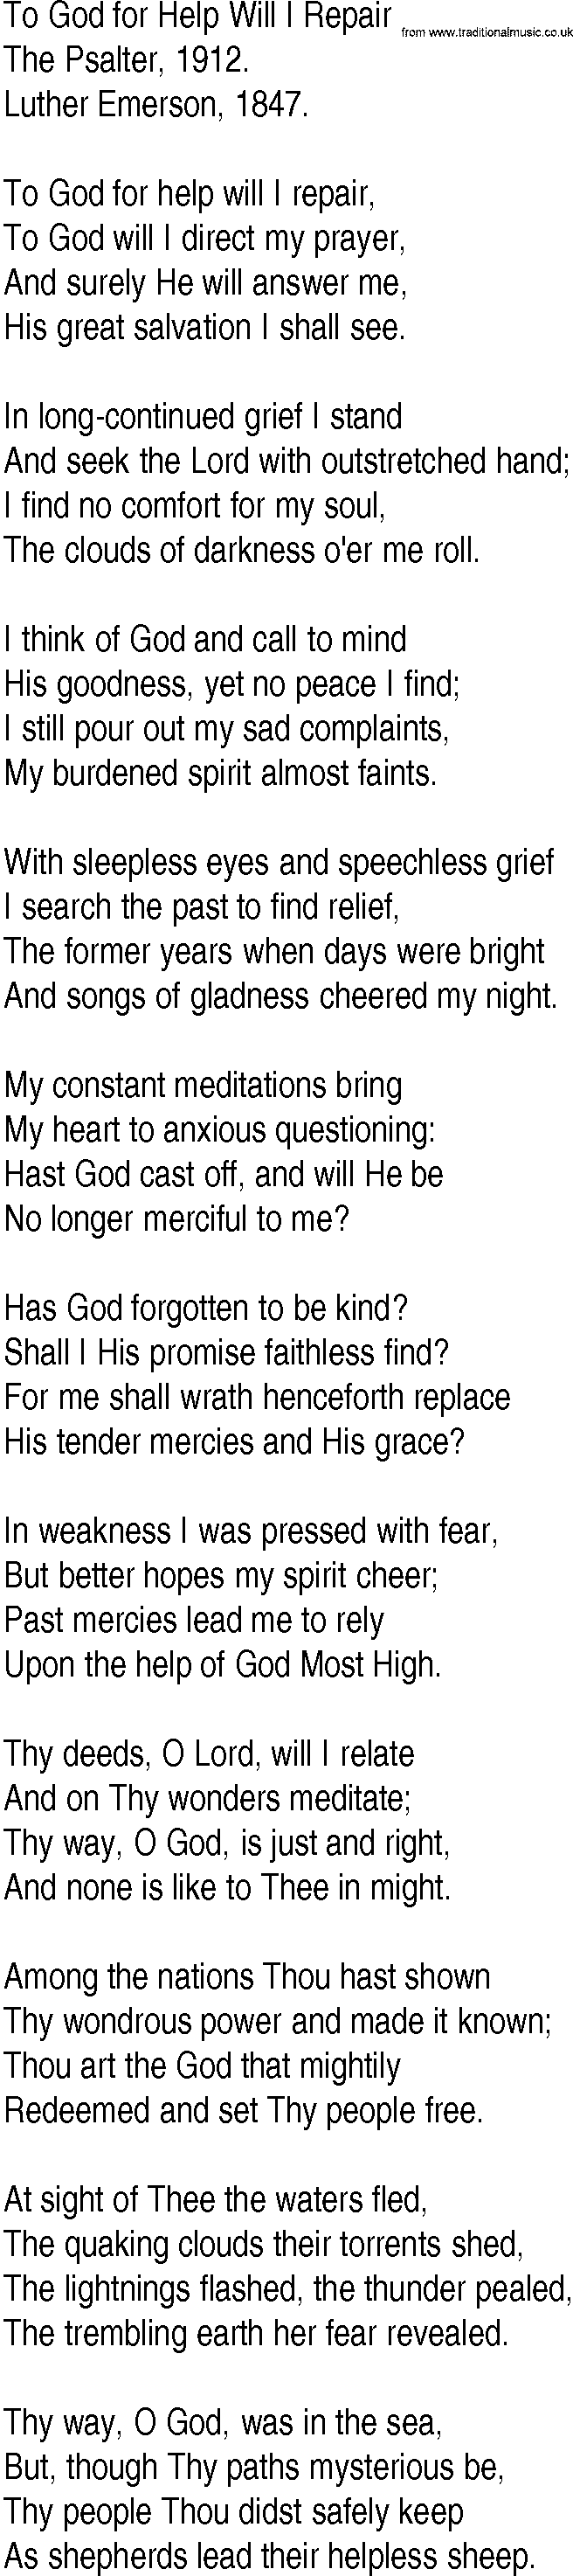 Hymn and Gospel Song: To God for Help Will I Repair by The Psalter lyrics